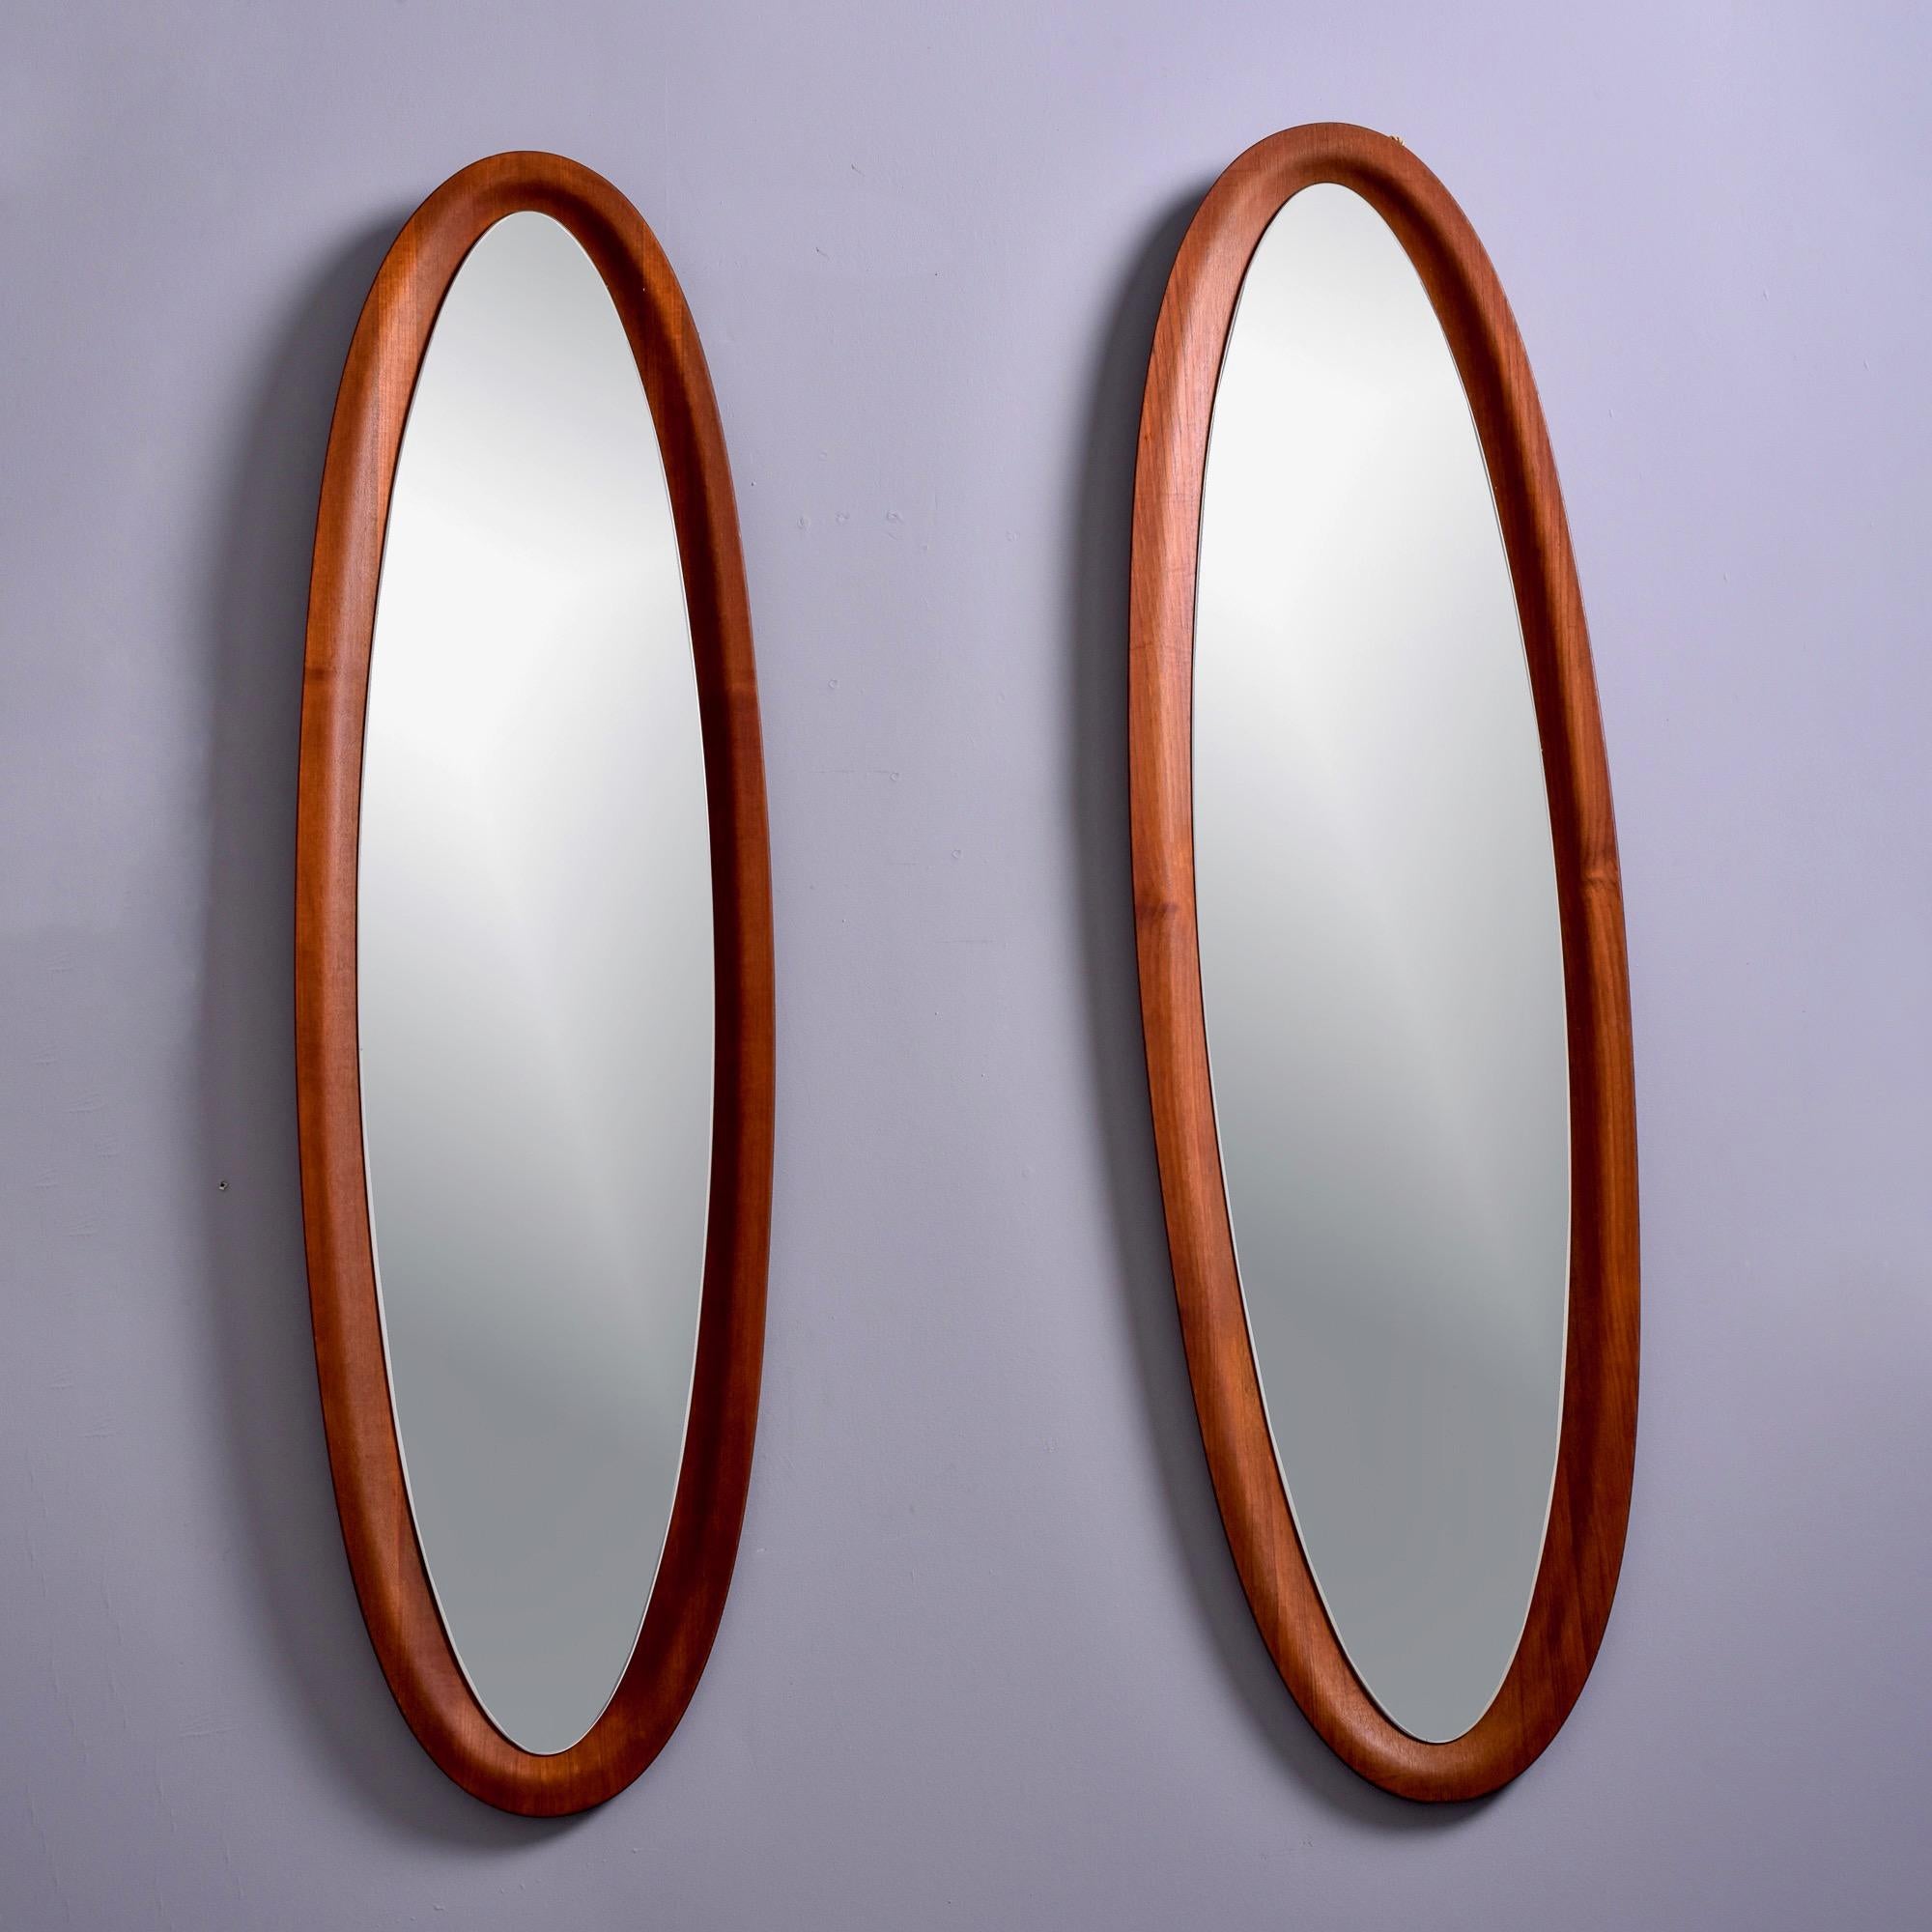 Found in Italy, this pair of circa 1960s oval mirrors have wood frames that appear to be walnut. Frames have a bowl-form shape and mirrors are set into them. Unknown maker. Sold and priced as a pair. 

Actual Mirror Size: 52” h x 12” w.